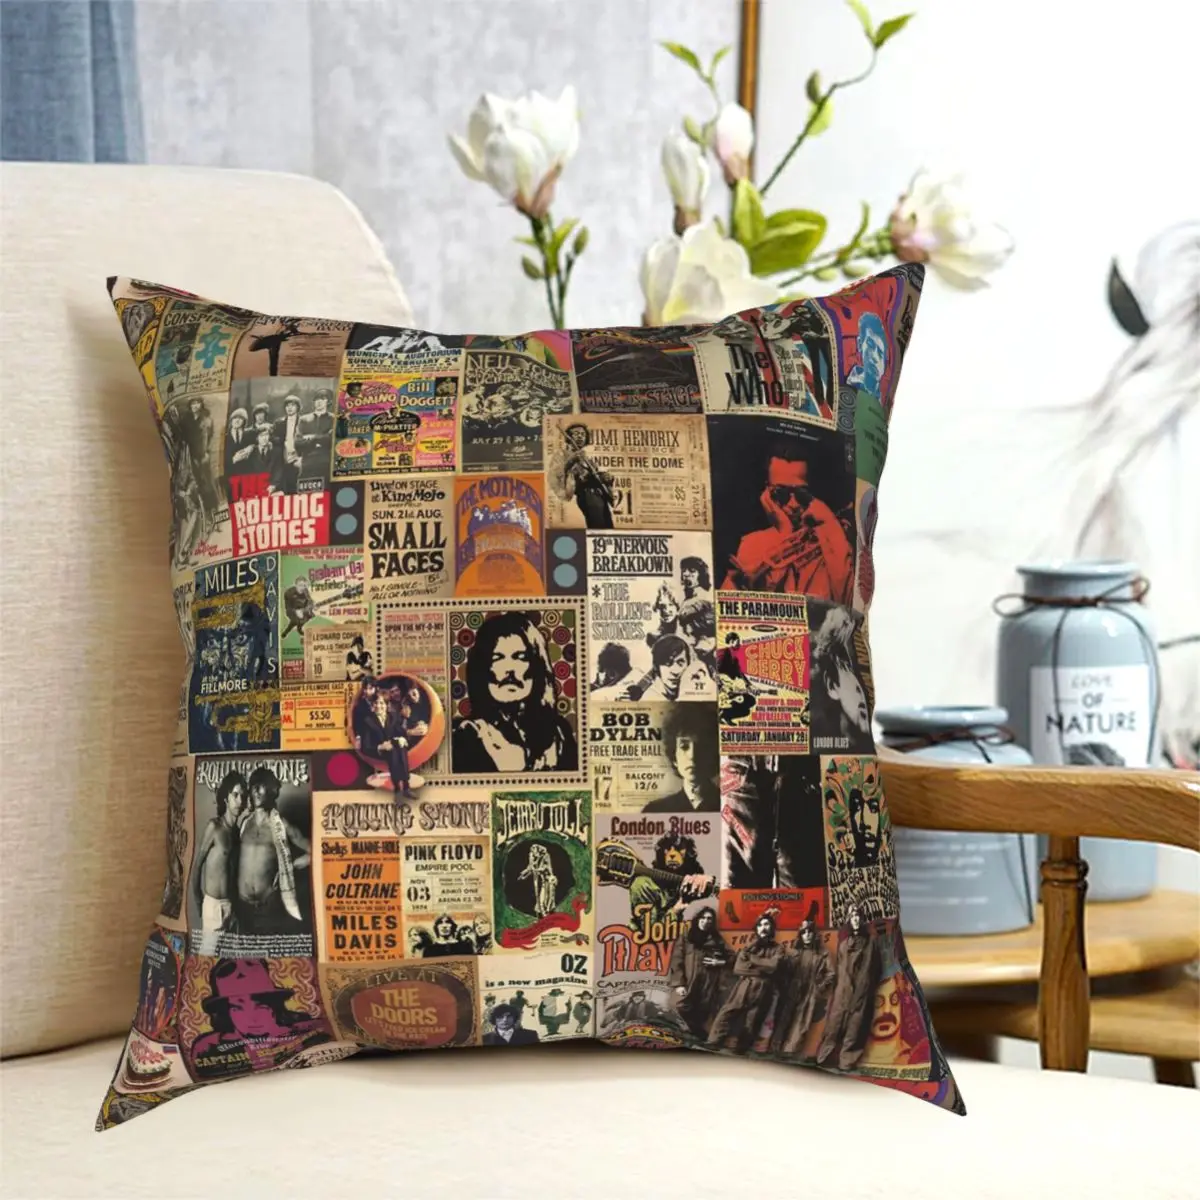 

Rock N' Roll Stories Square Pillowcase Pattern Zip Decorative Throw Pillow Case Car Cushion Cover